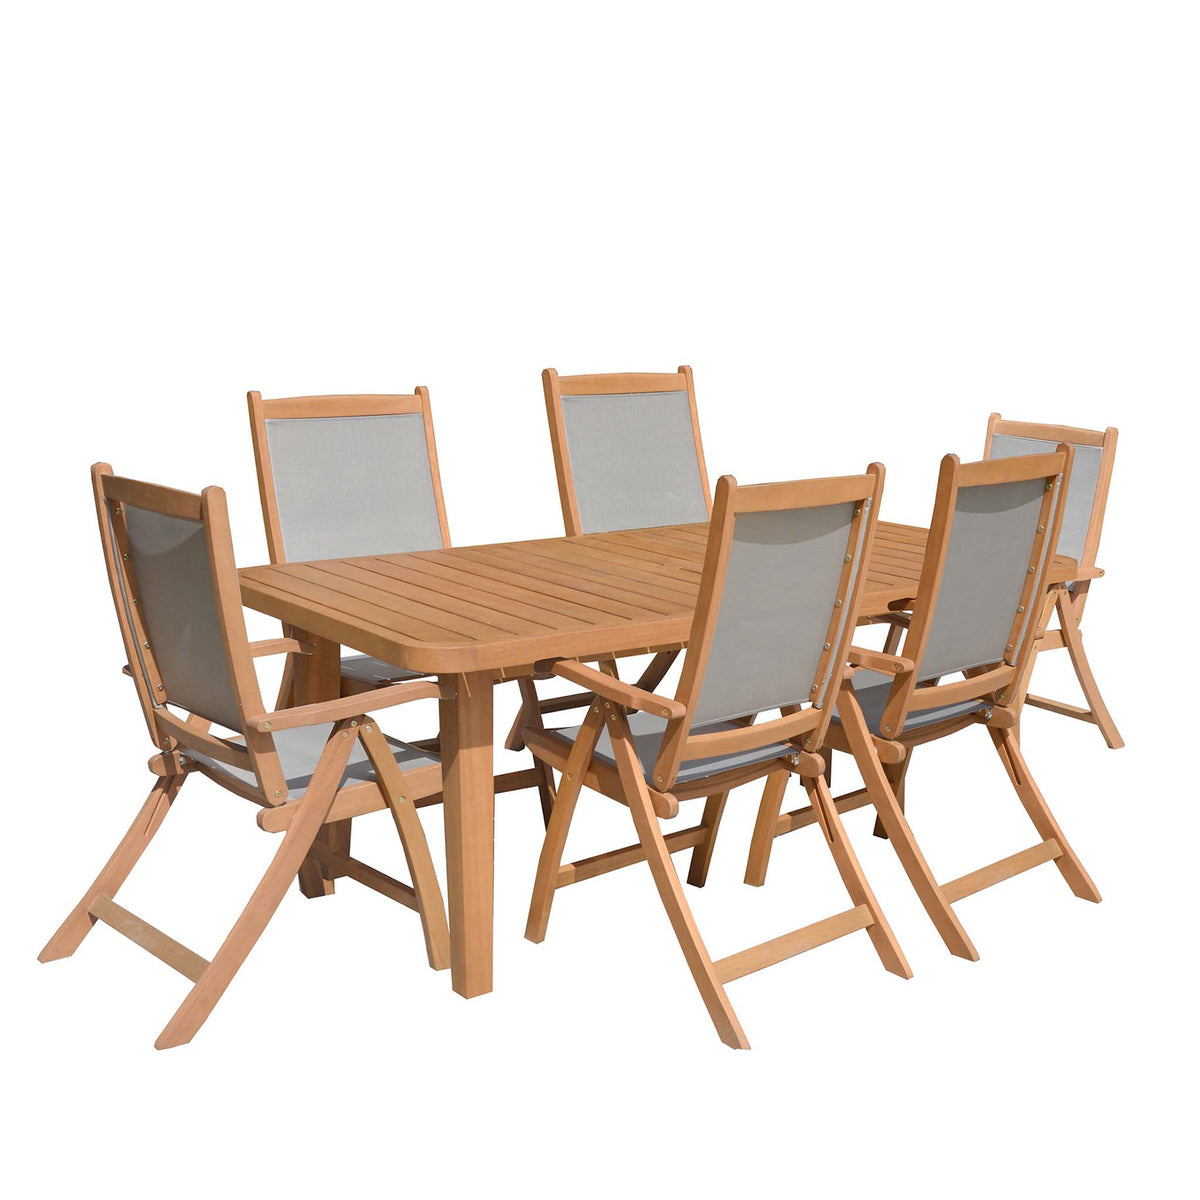 Broadway Acacia Wooden 6 Seat Garden Dining Set with reclining chairs by Roseland Furniture